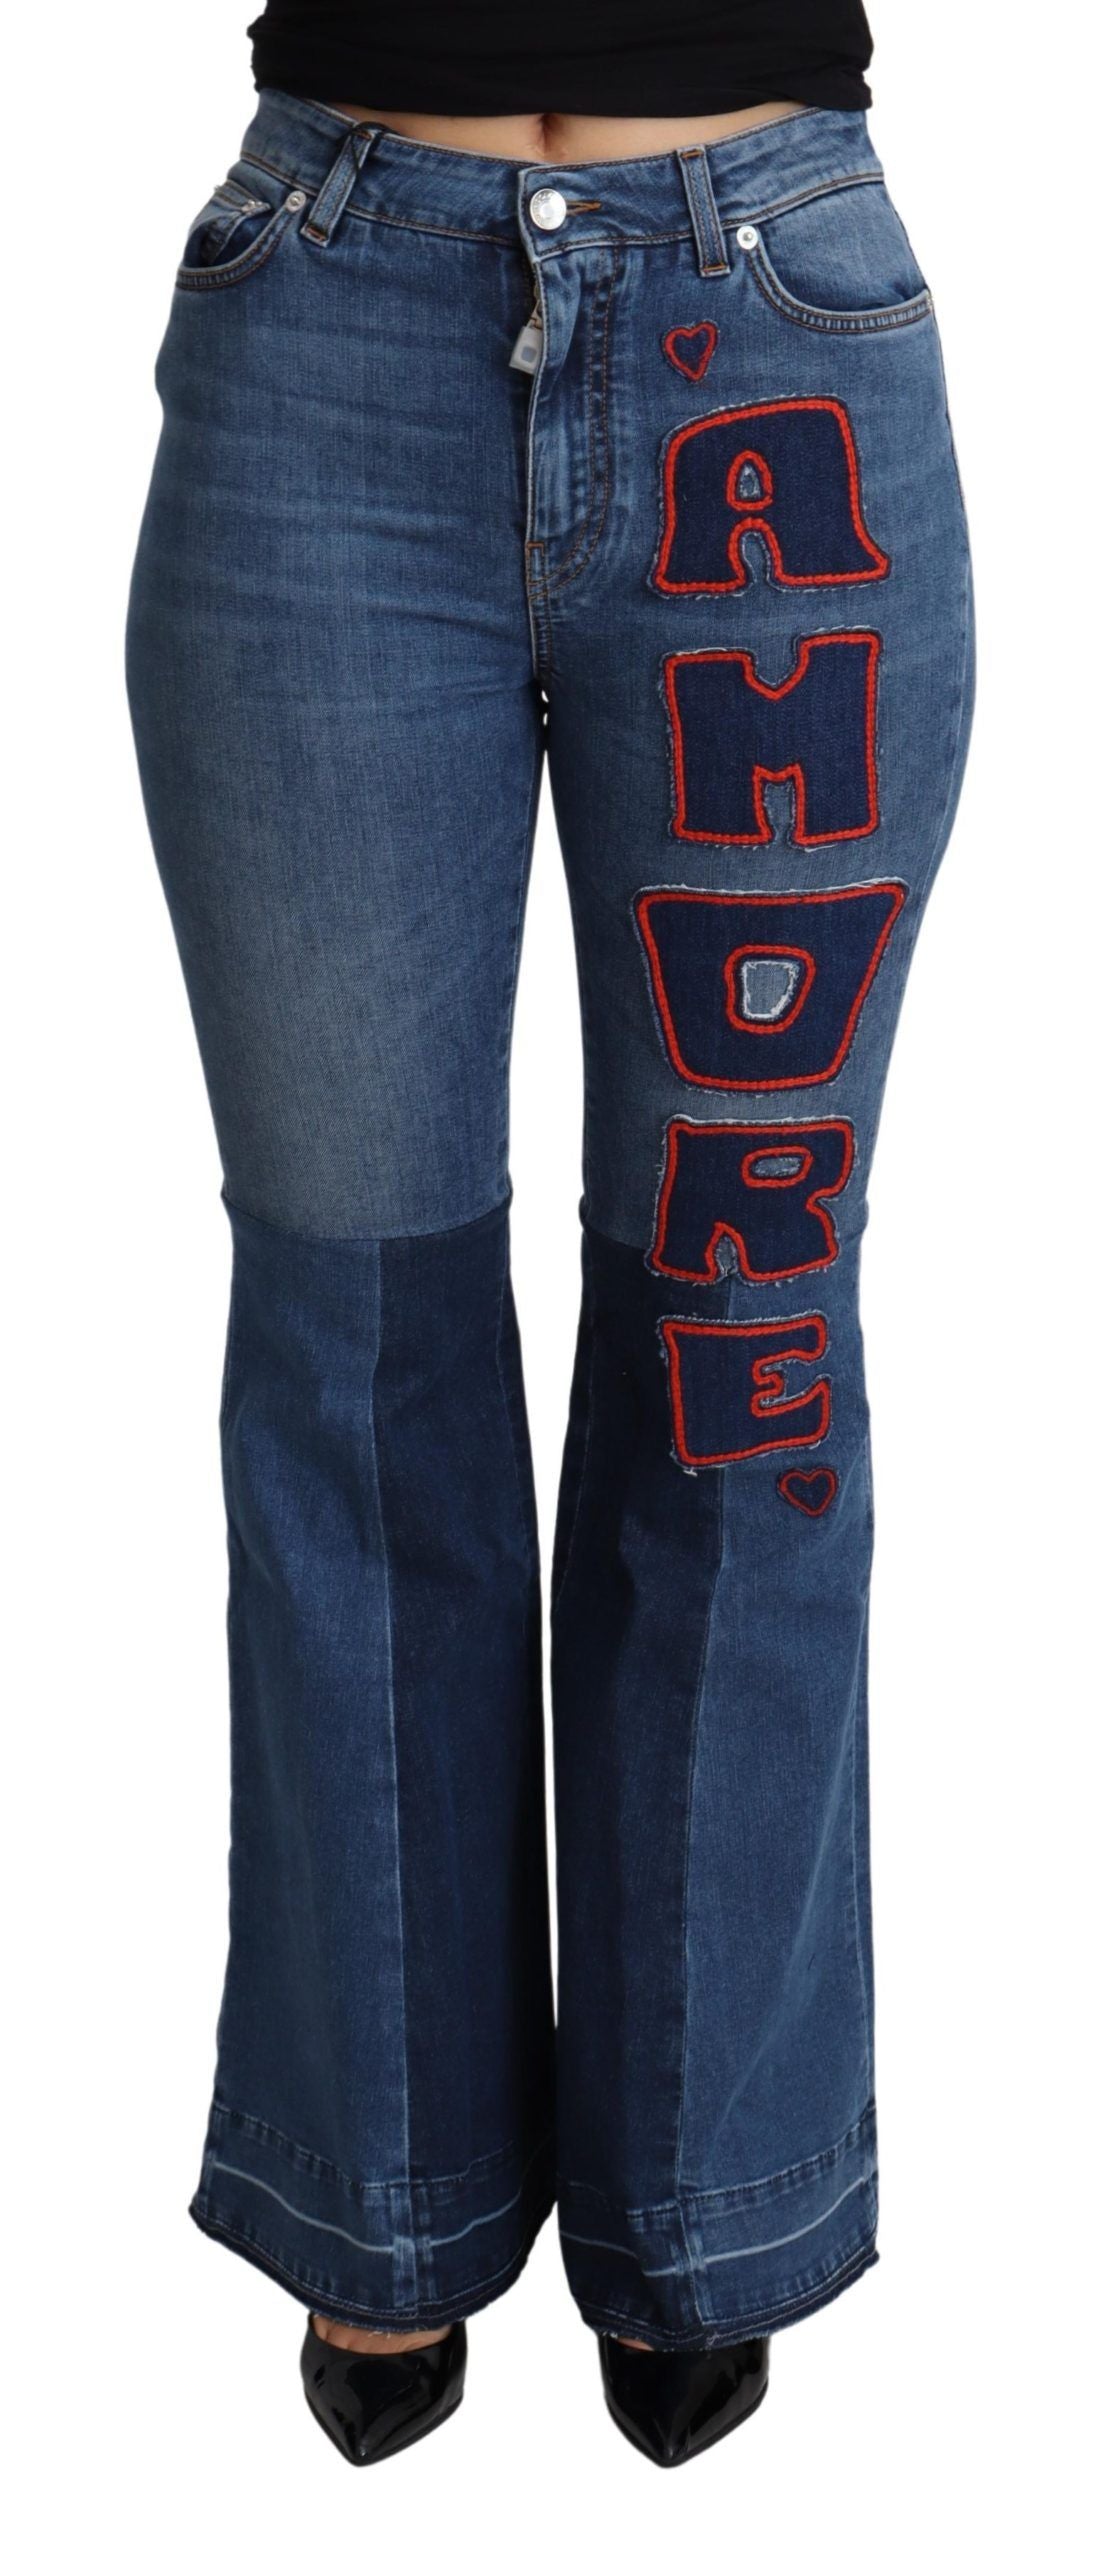 Elegant Boot Cut Denim Jeans with Amore Patch